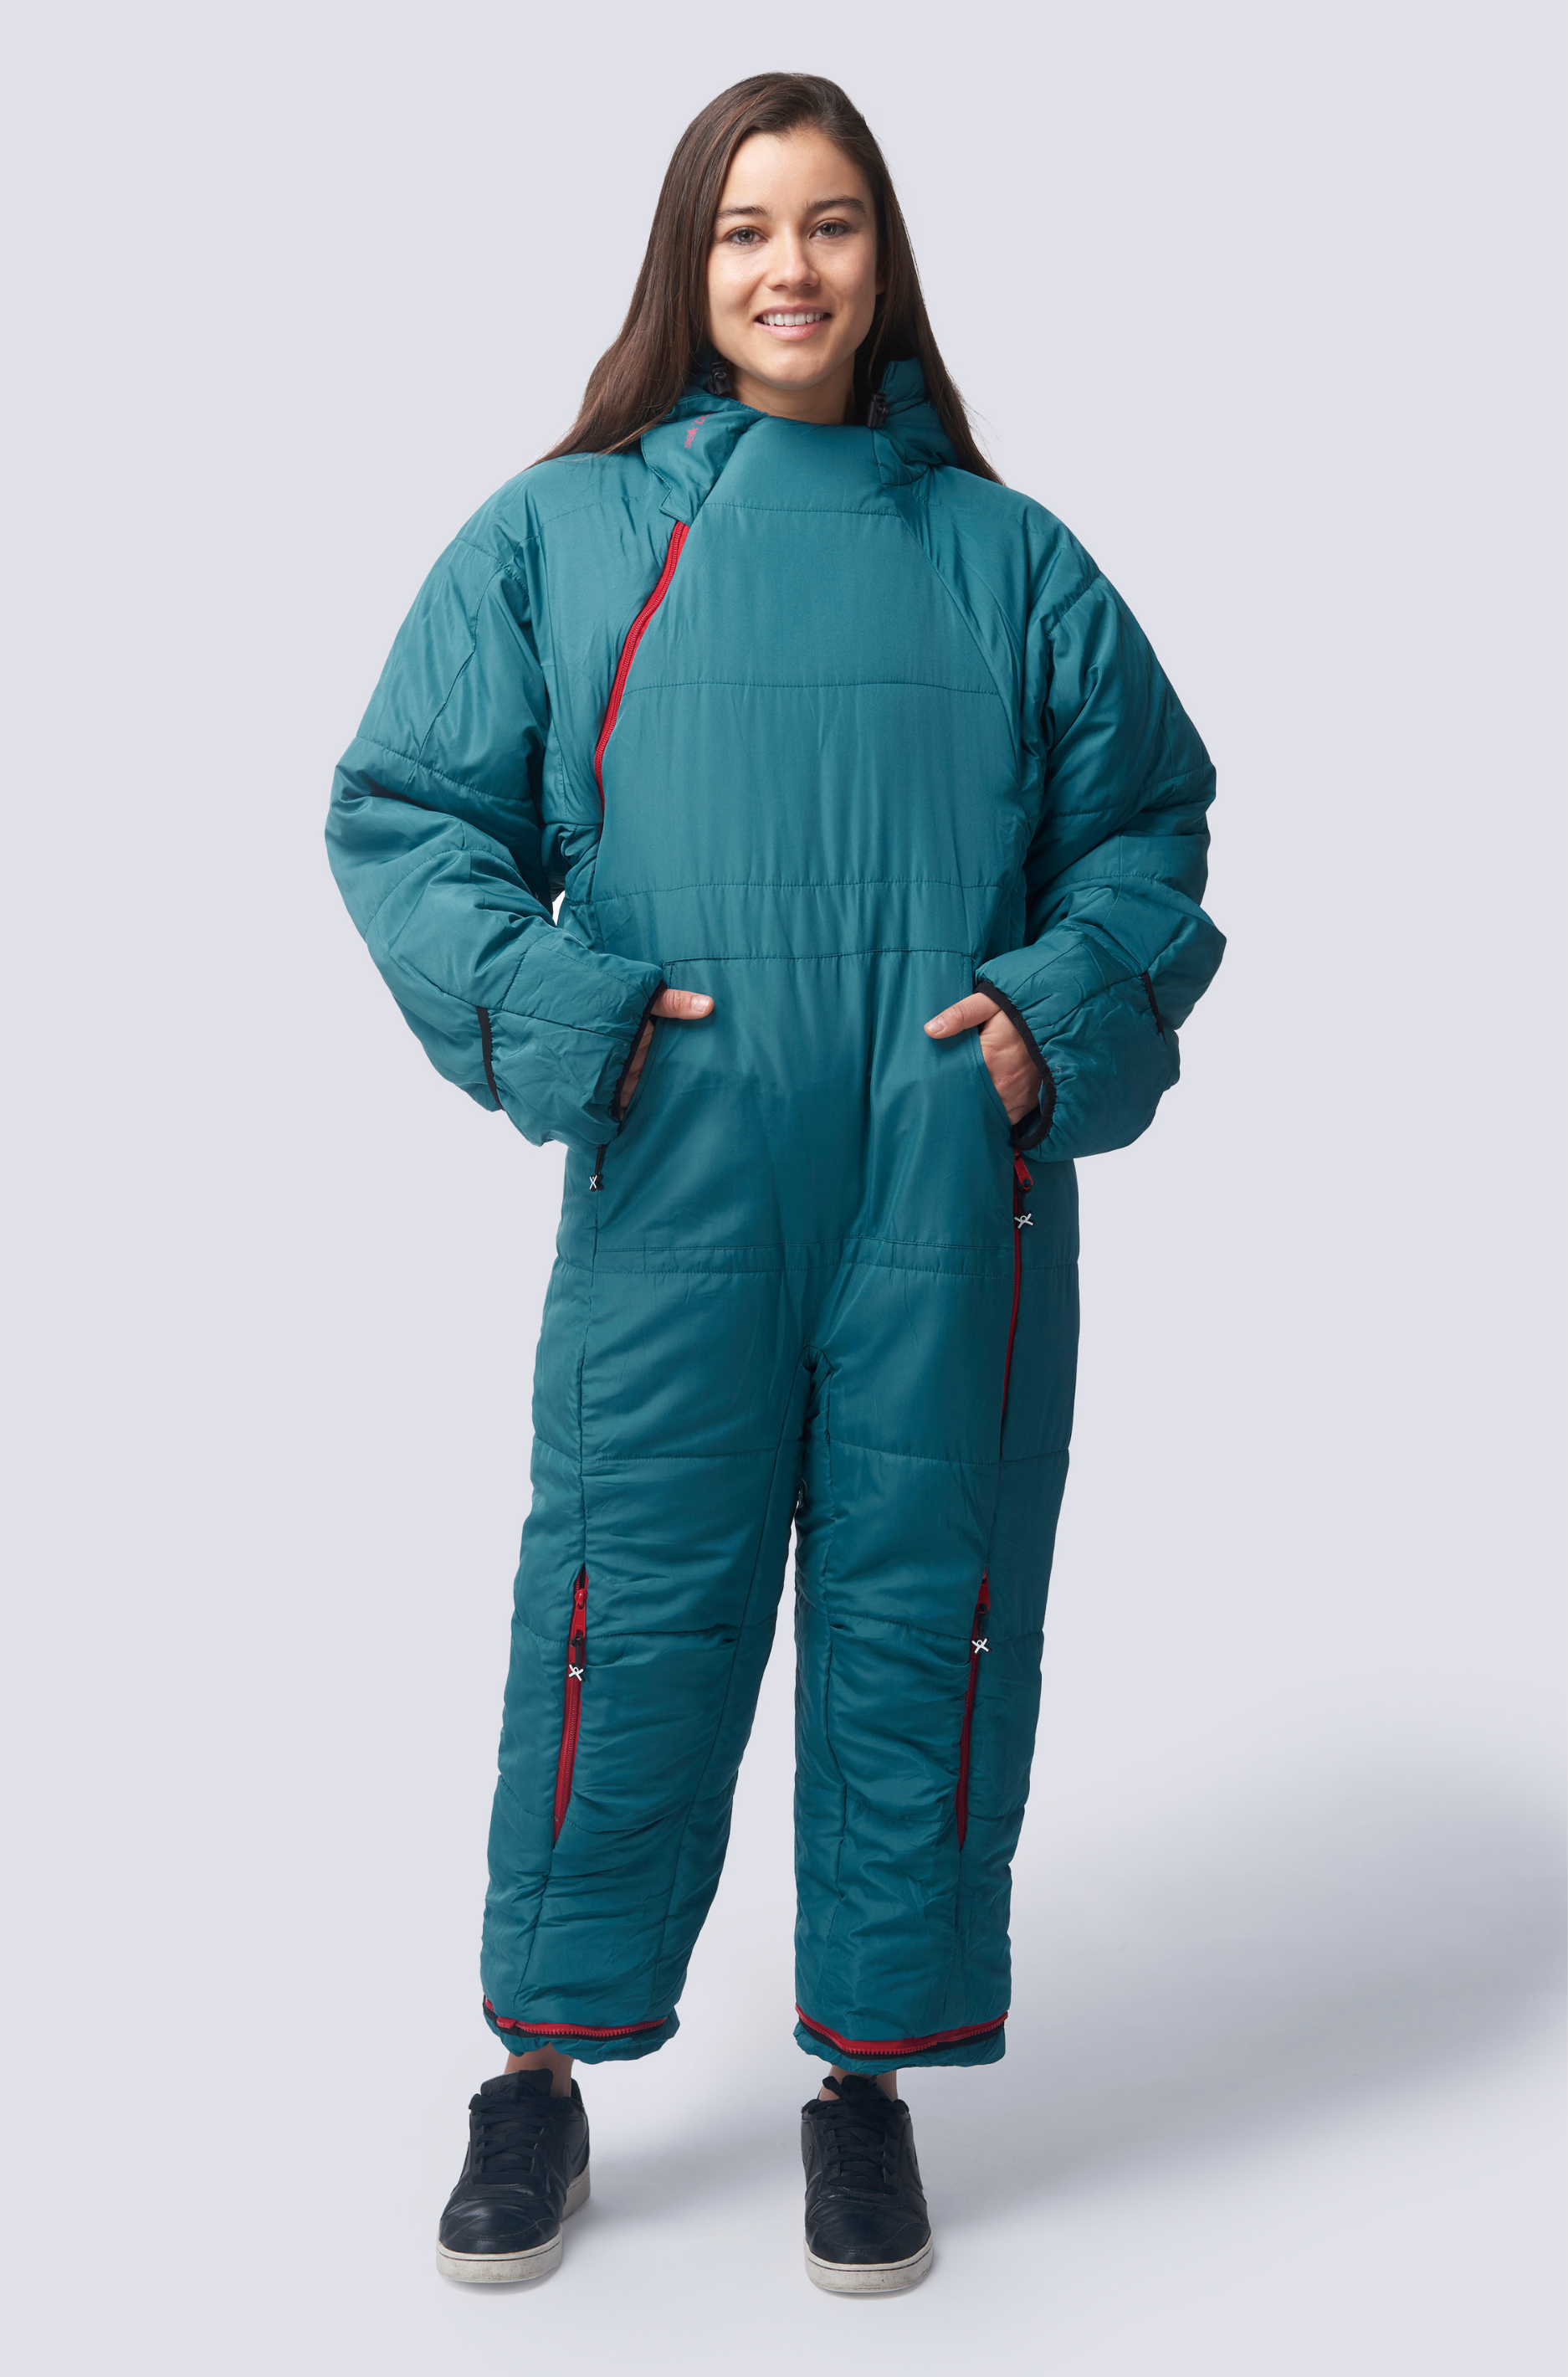  Adult Wearable Sleeping Bag Suit for Camping, Standing